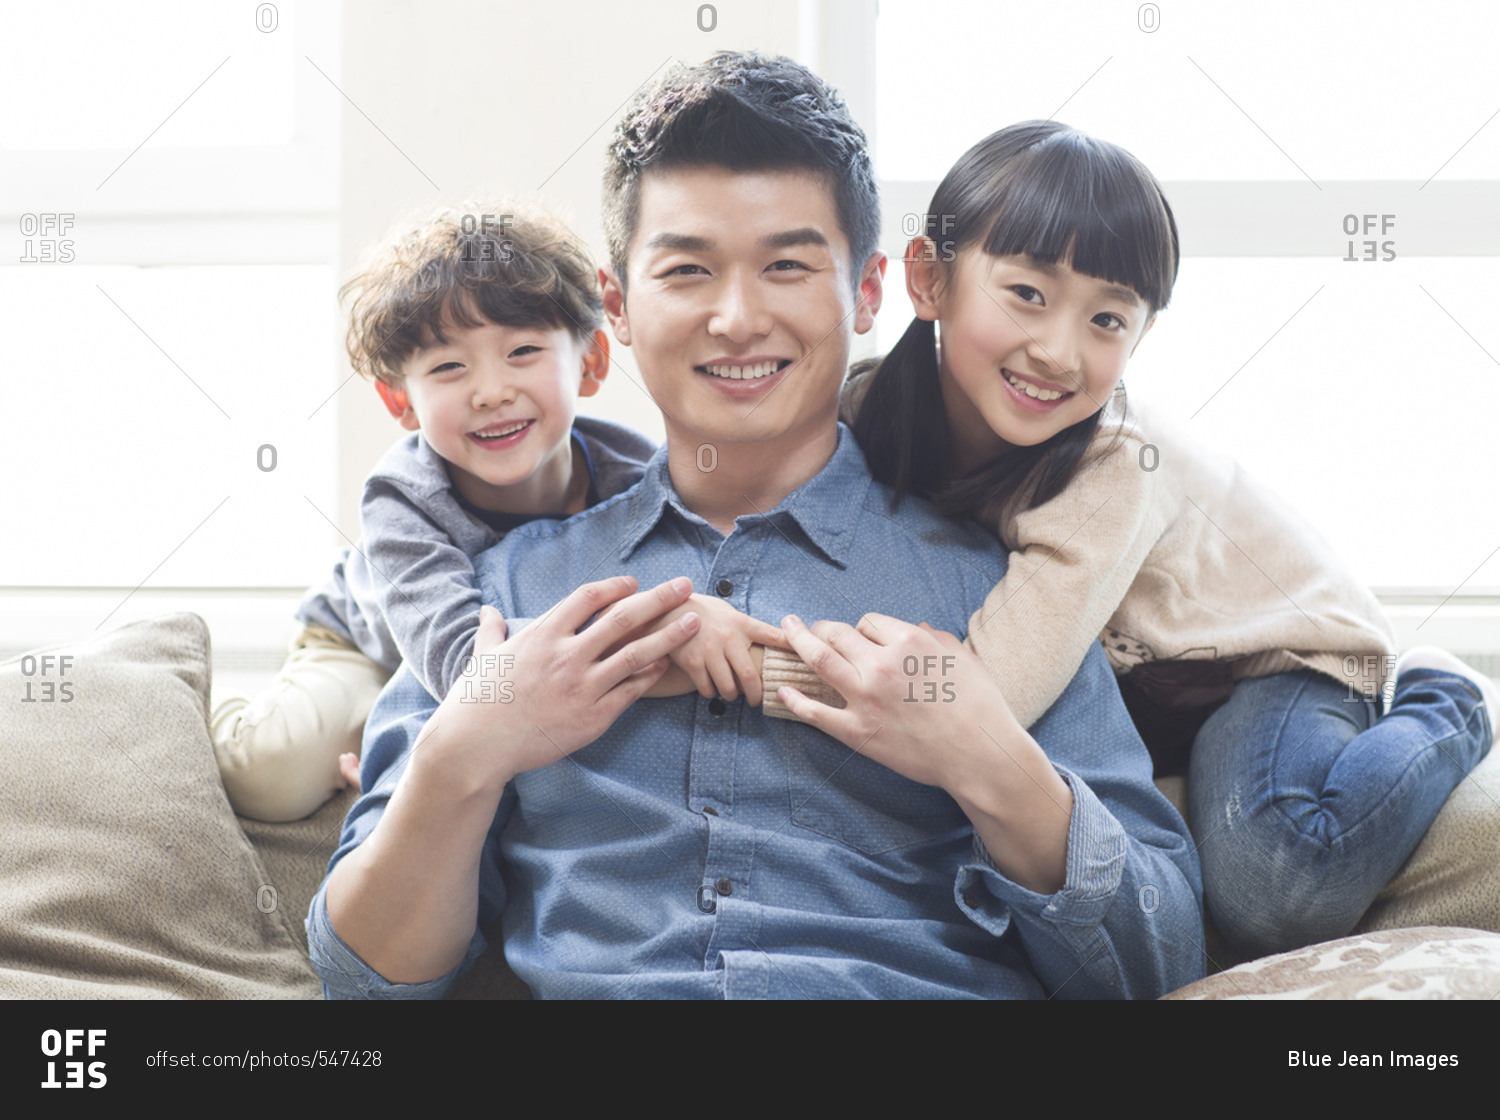 Happy young family